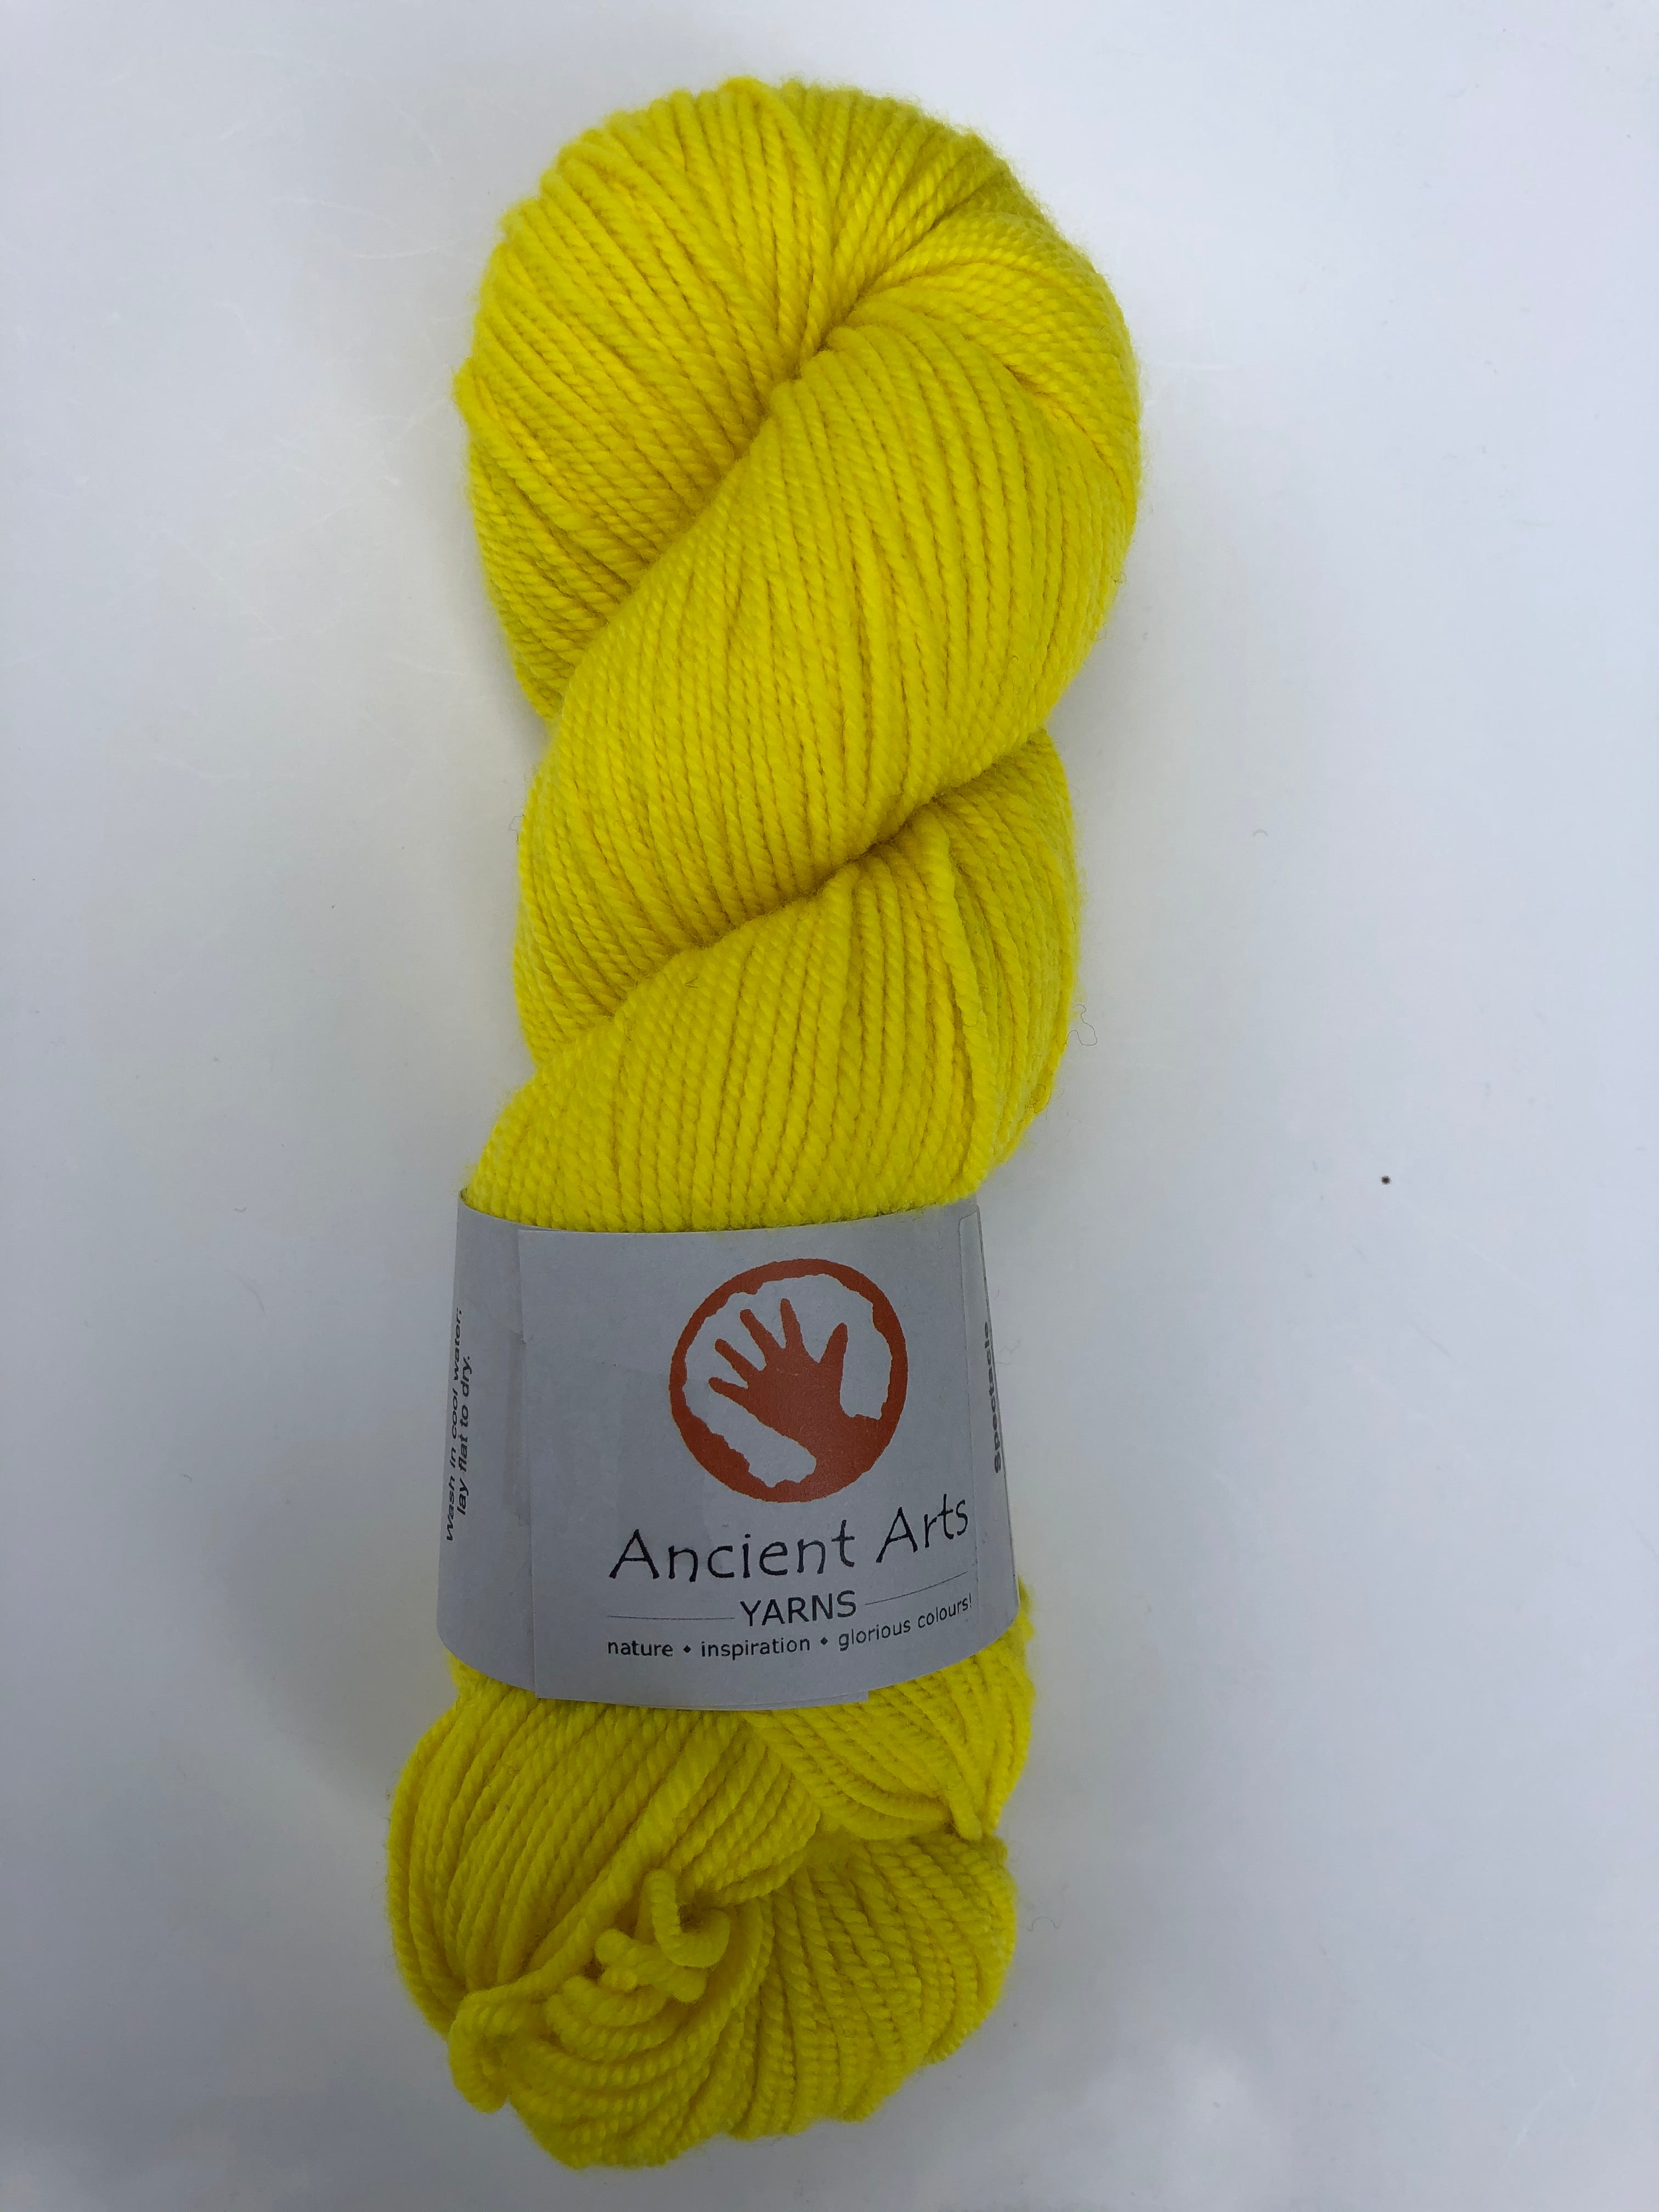 Spectacle - DK - Ancient Arts Yarns